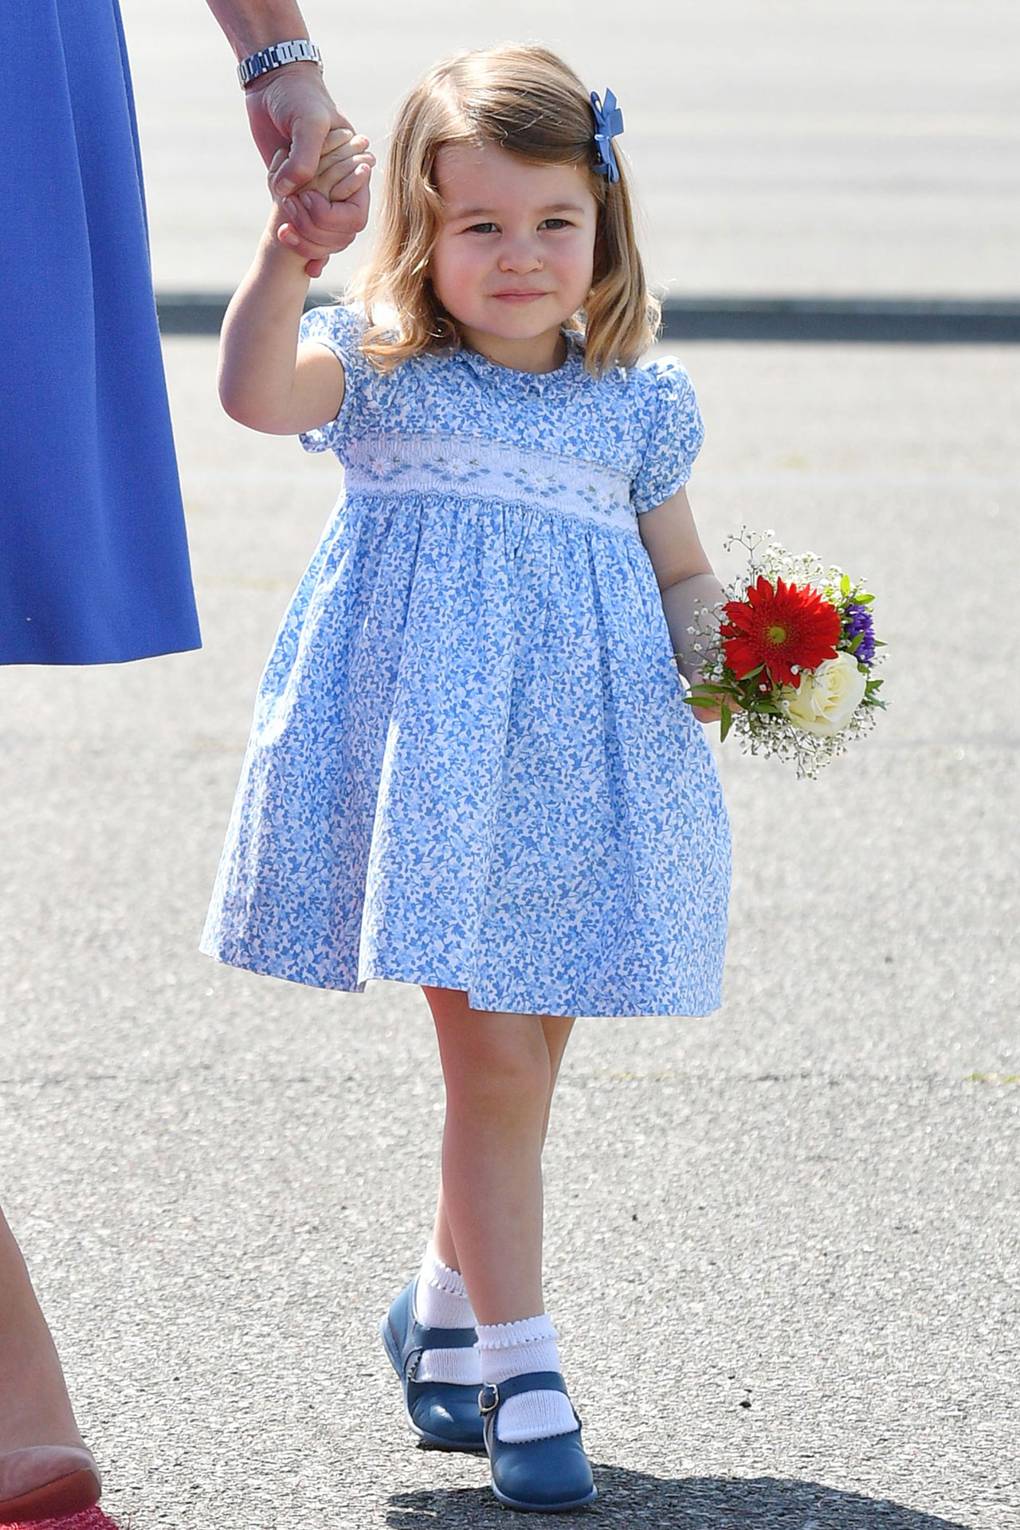 Princess Charlotte Cute Pictures From Then And Now Glamour Uk